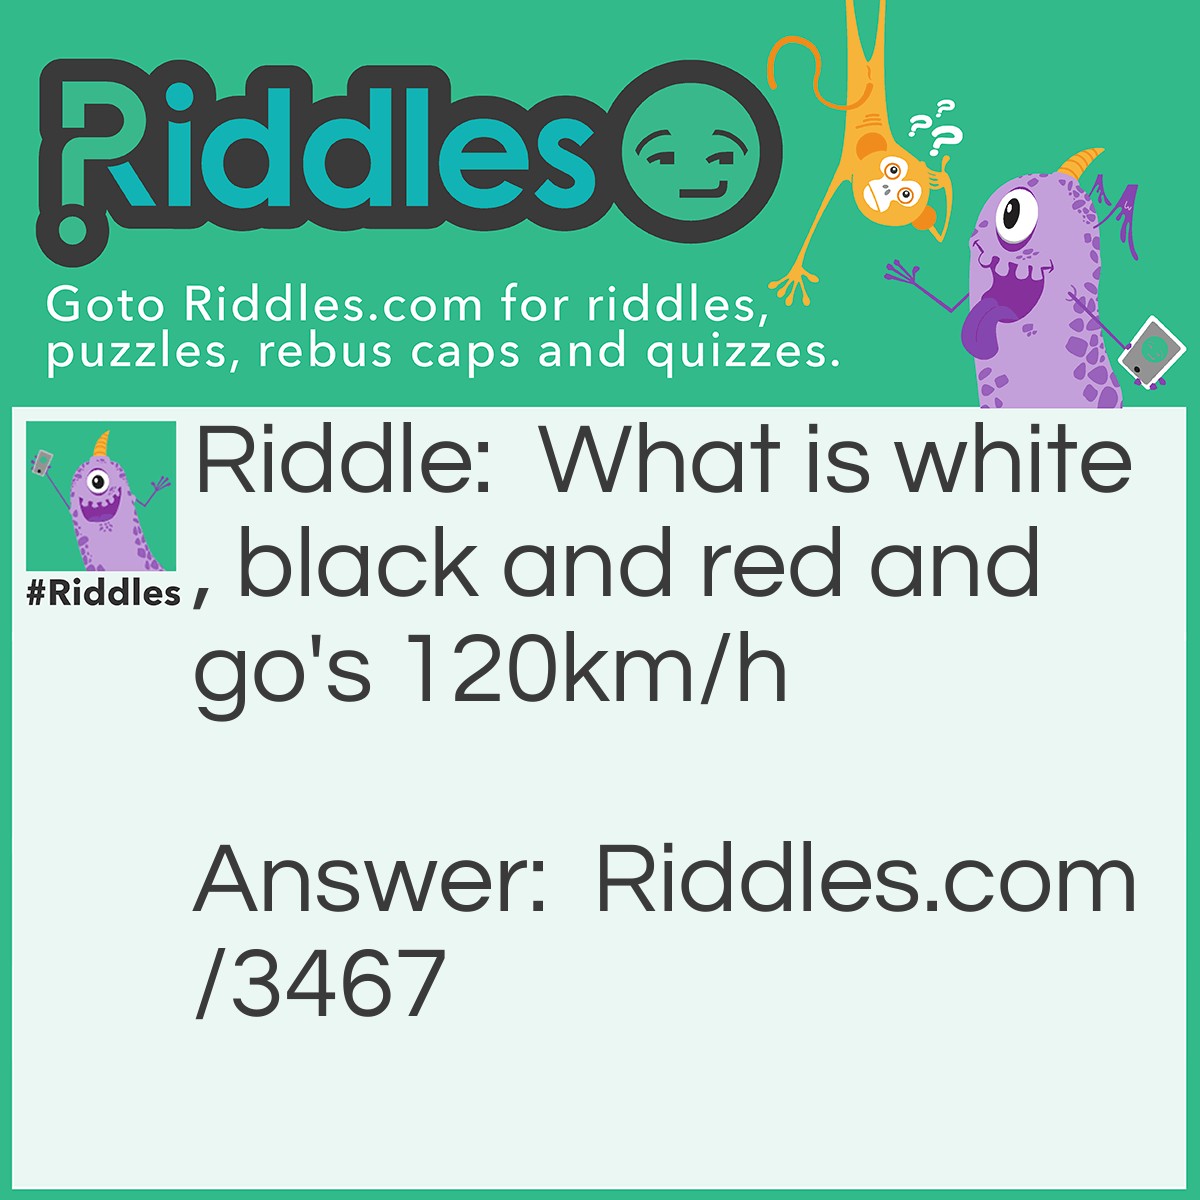 Riddle: What is white, black and red and go's 120km/h? Answer: A nun in a blender.